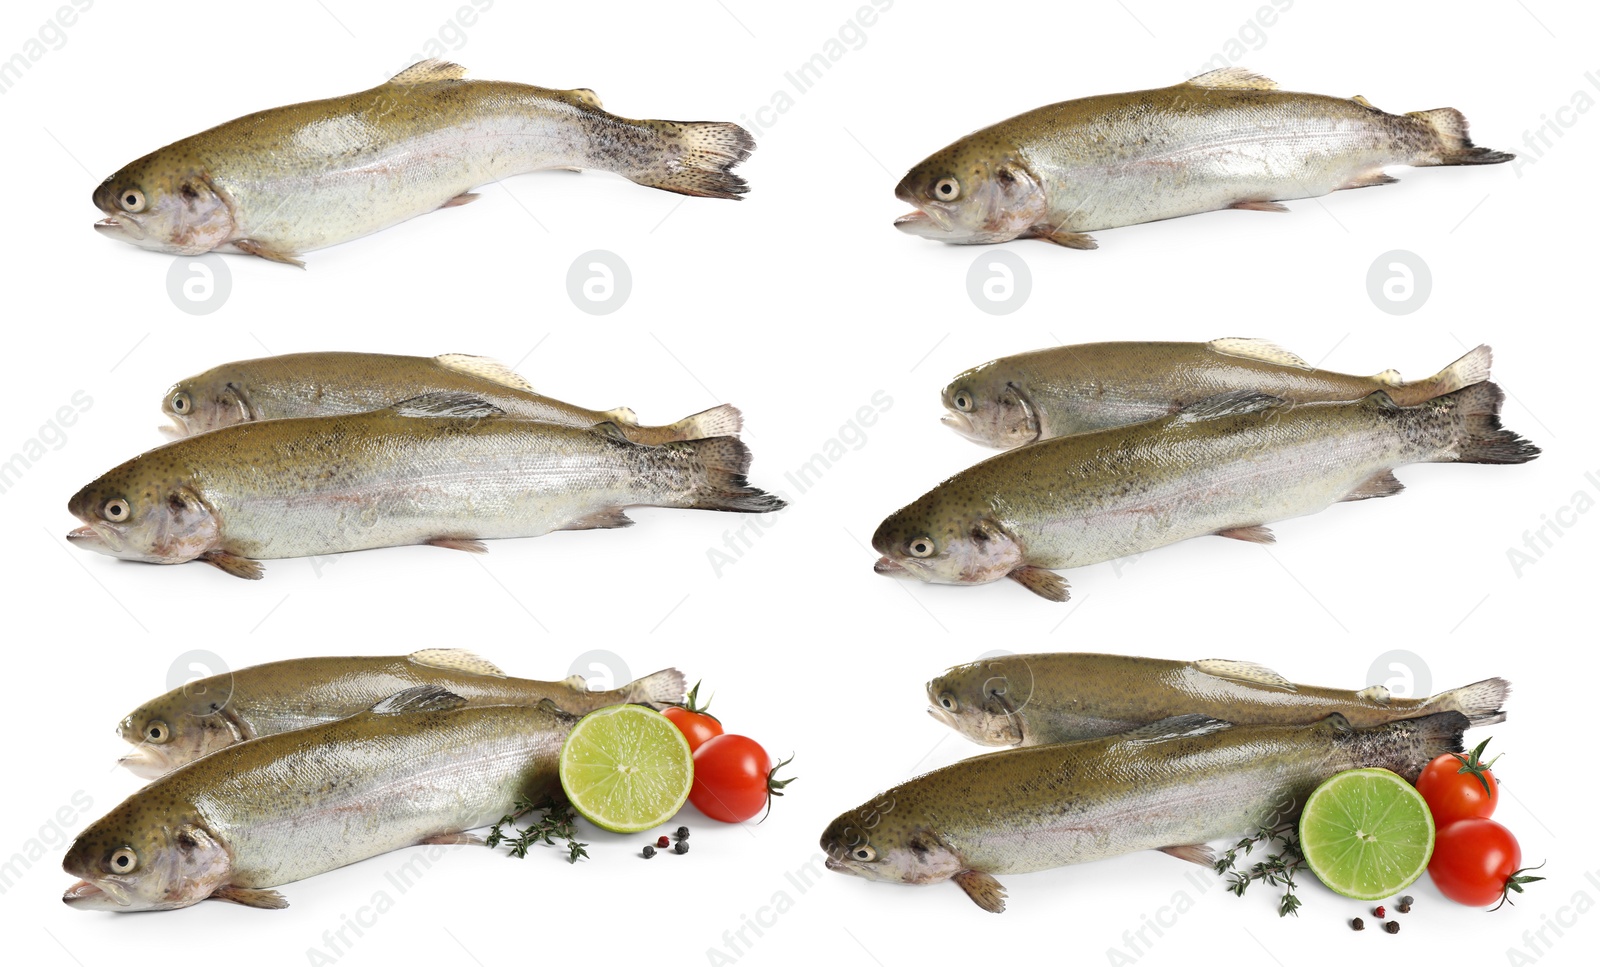 Image of Set of fresh cutthroat trout fish on white background